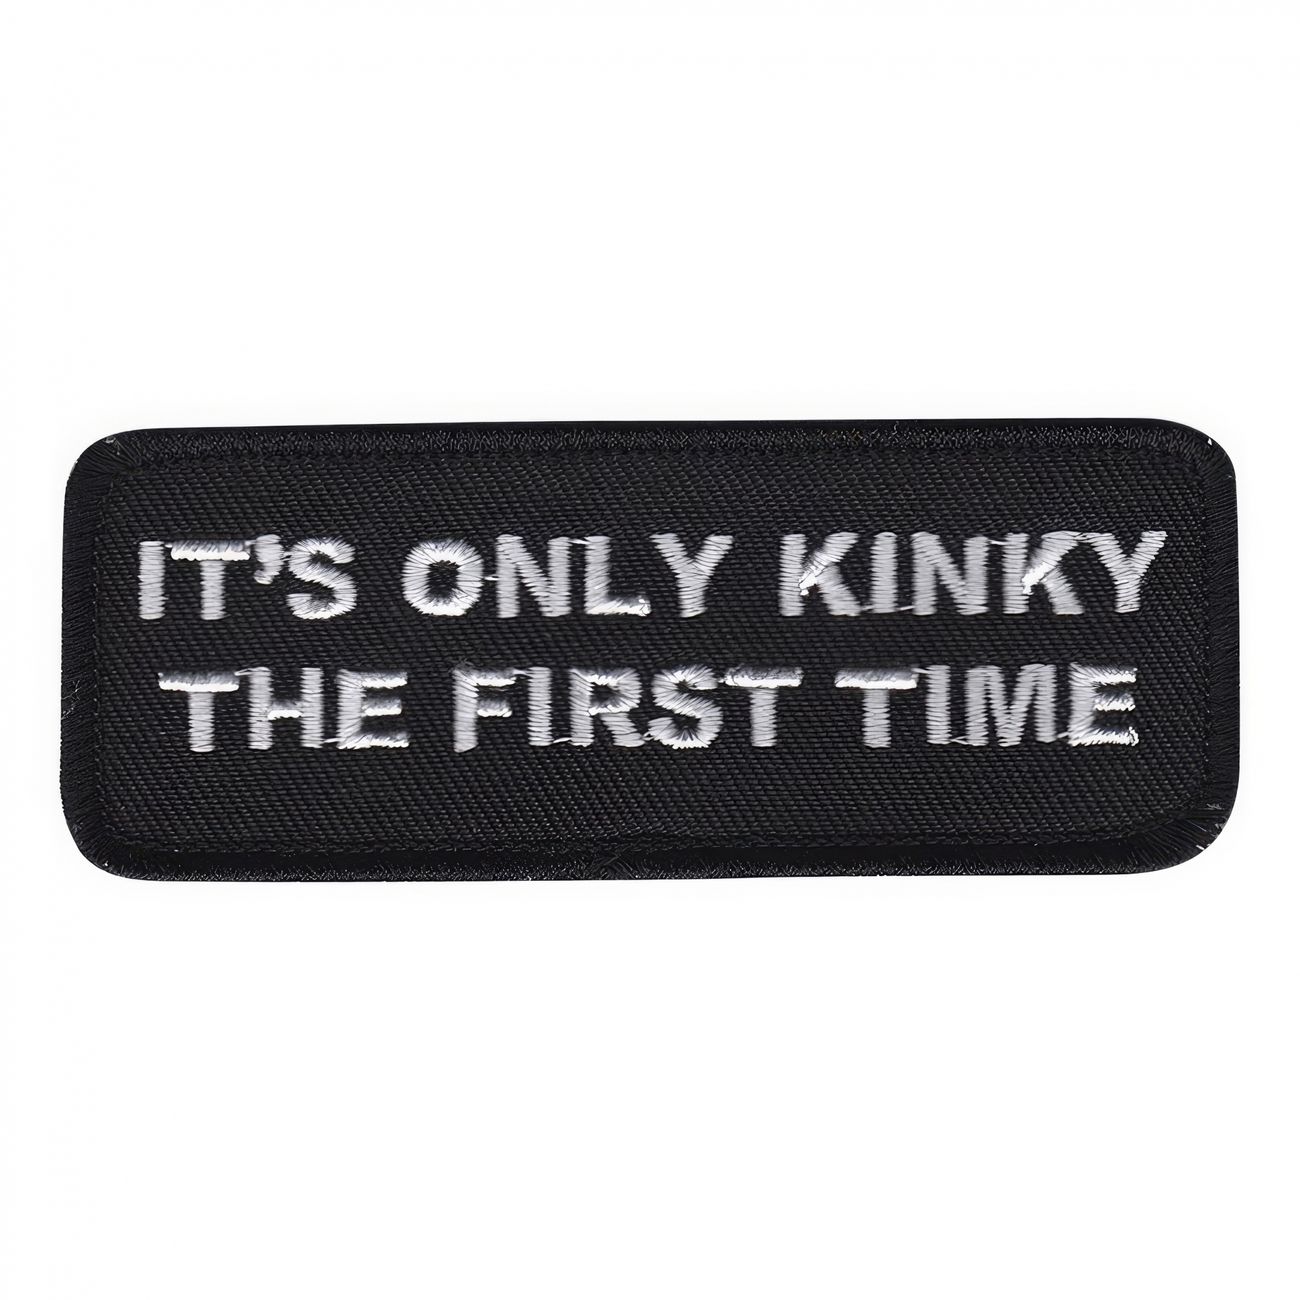 tygmarke-it-is-only-kinky-the-first-time-93857-1